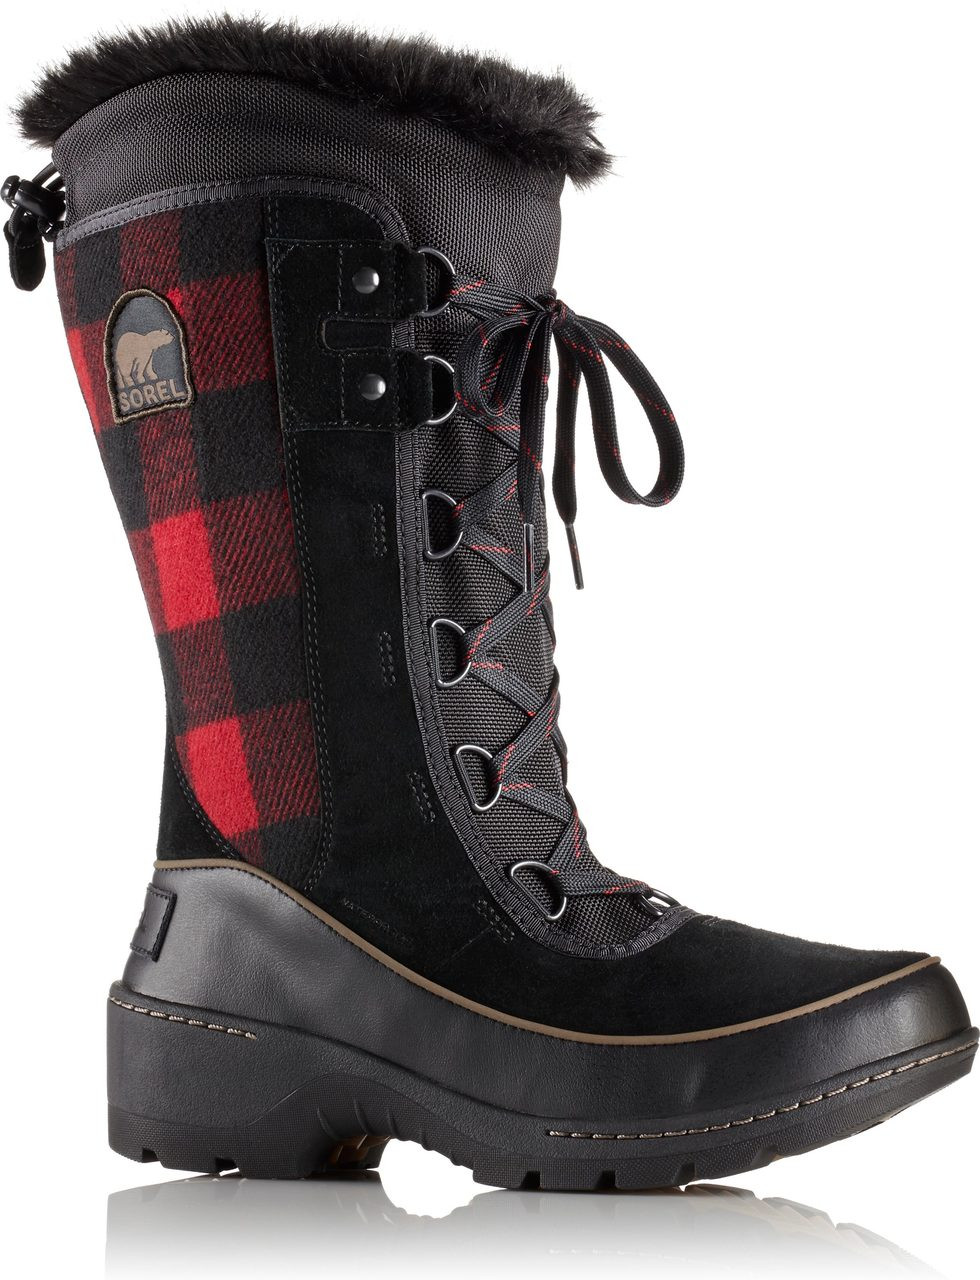 Details about   Sorel Women's Tivoli III High Various Sizes and Colors